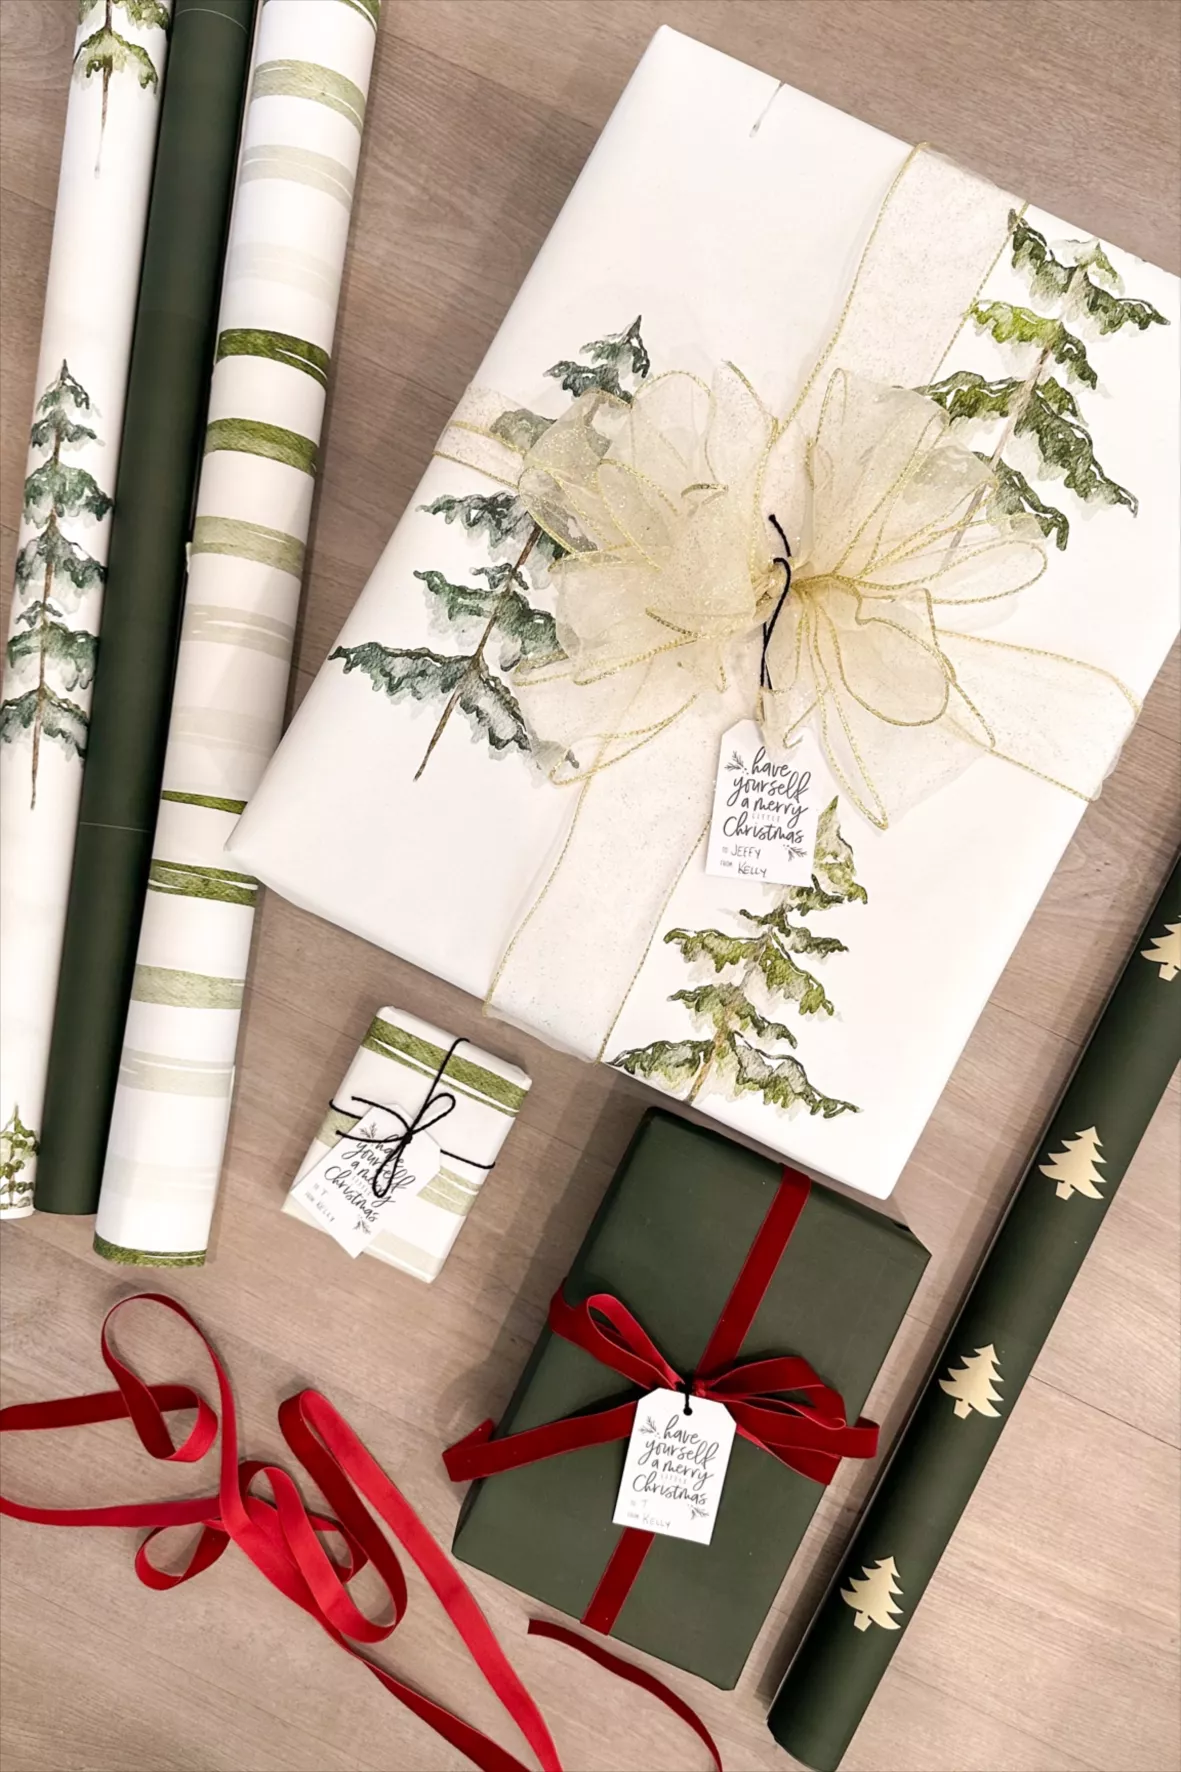 Solid deep forest green wrapping paper